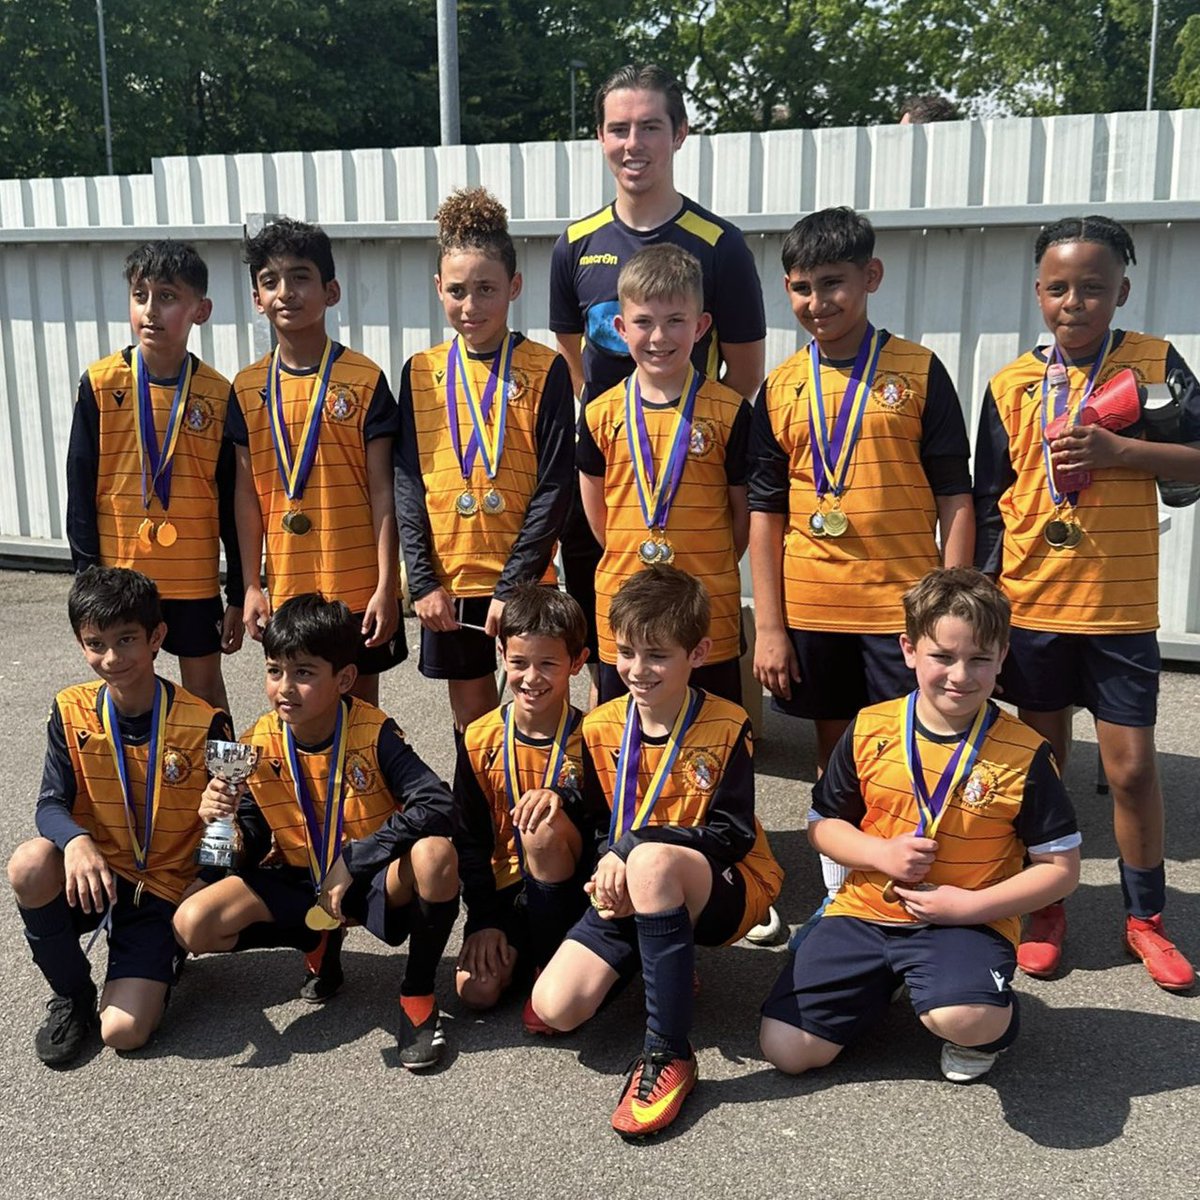 Congratulations to our U10s, winners of the Thames Valley Development League Plate this morning! 🏆 They won the final 4-2 with goals from Lee, Earnest, Koroush and AJ. #OneSlough